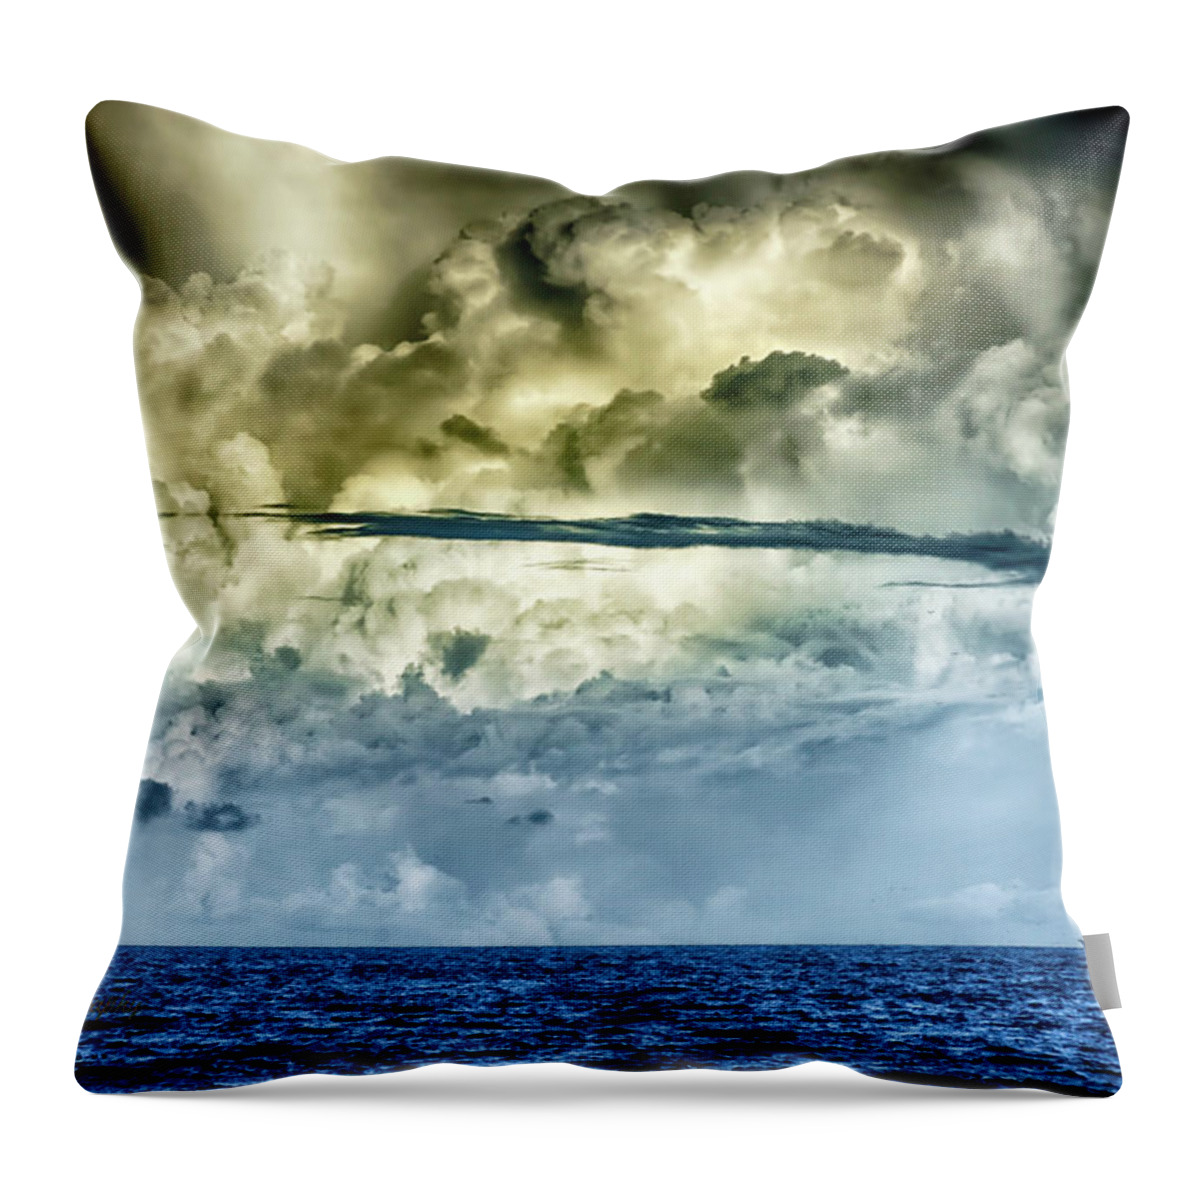 Ocean Throw Pillow featuring the photograph Storm Shrimping by Joseph Desiderio